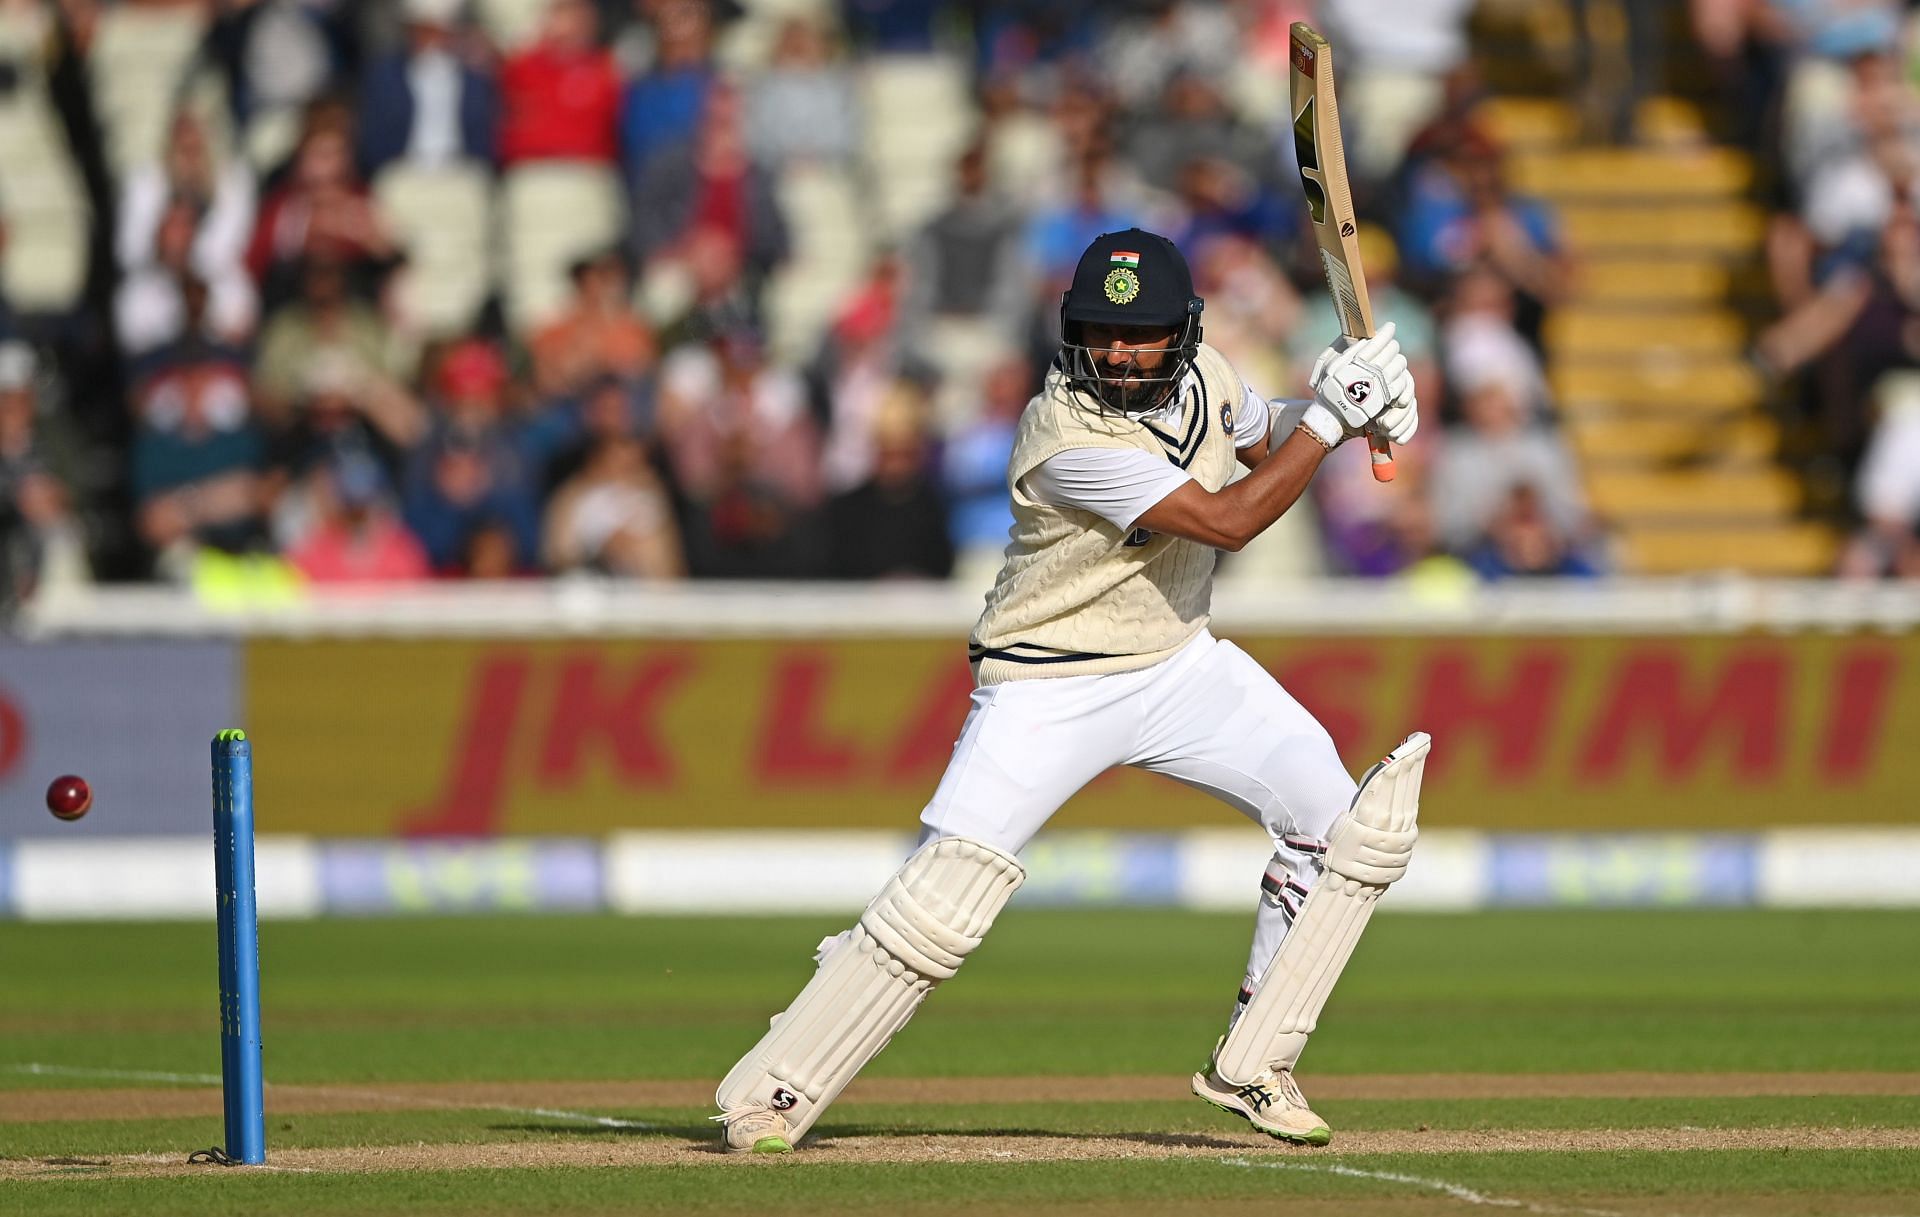 Cheteshwar Pujara is known to be a steady accumulator of runs.